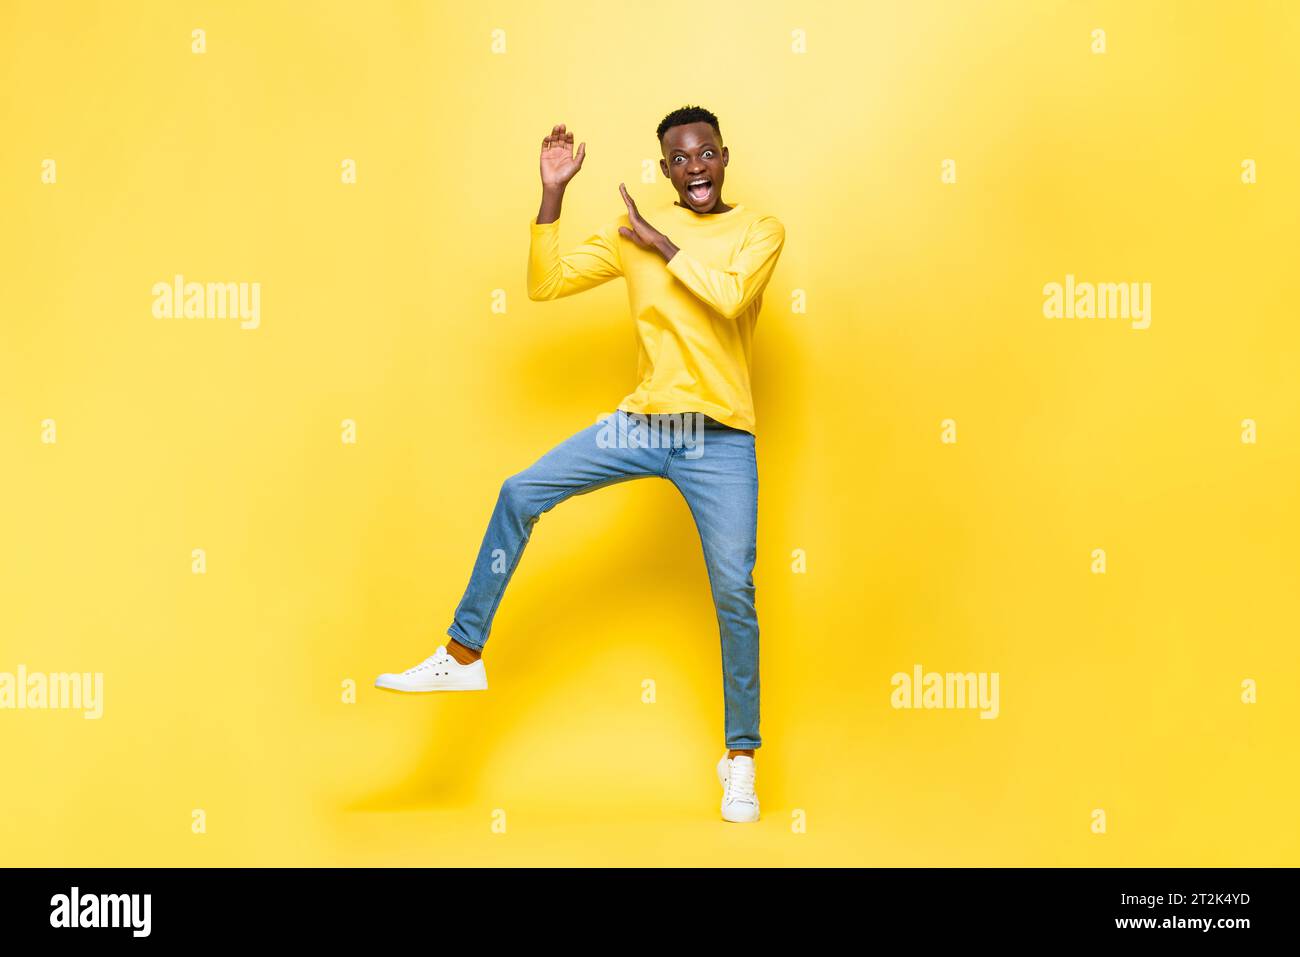 Shocked African man jumping with hands raised in studio yellow color isolated background Stock Photo